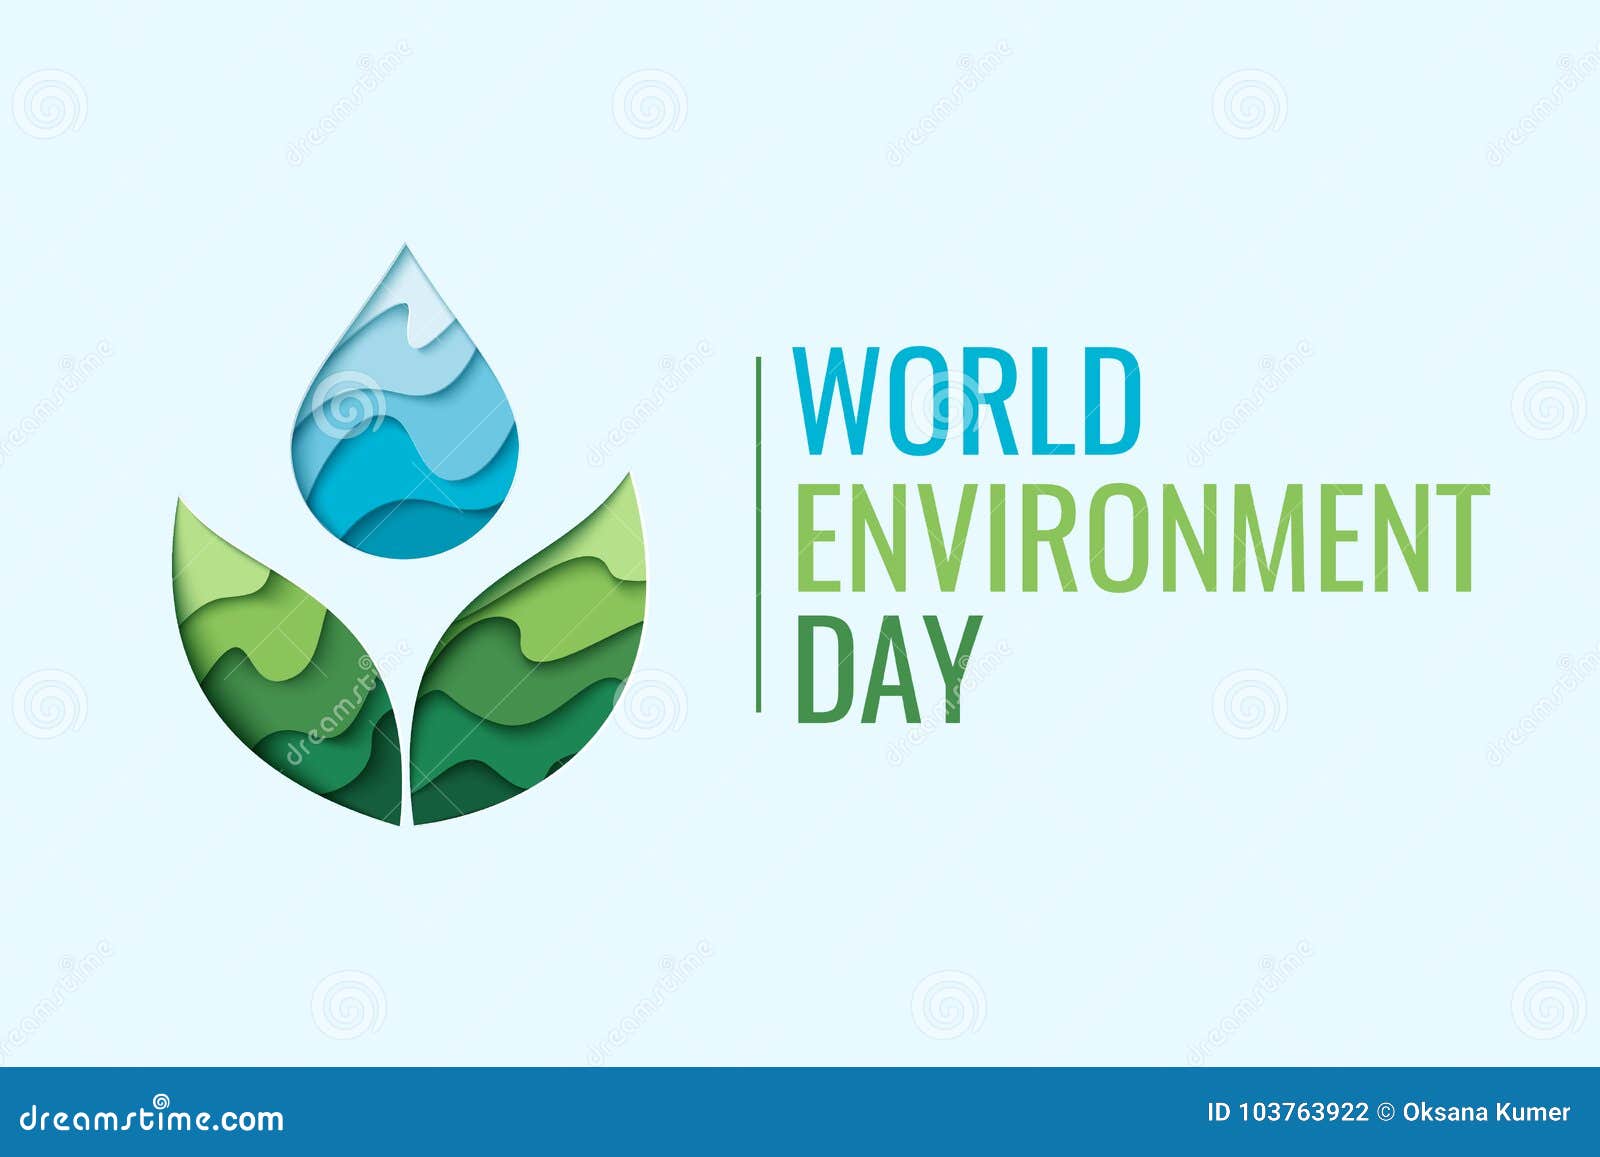 world environment day - waterdrop concept